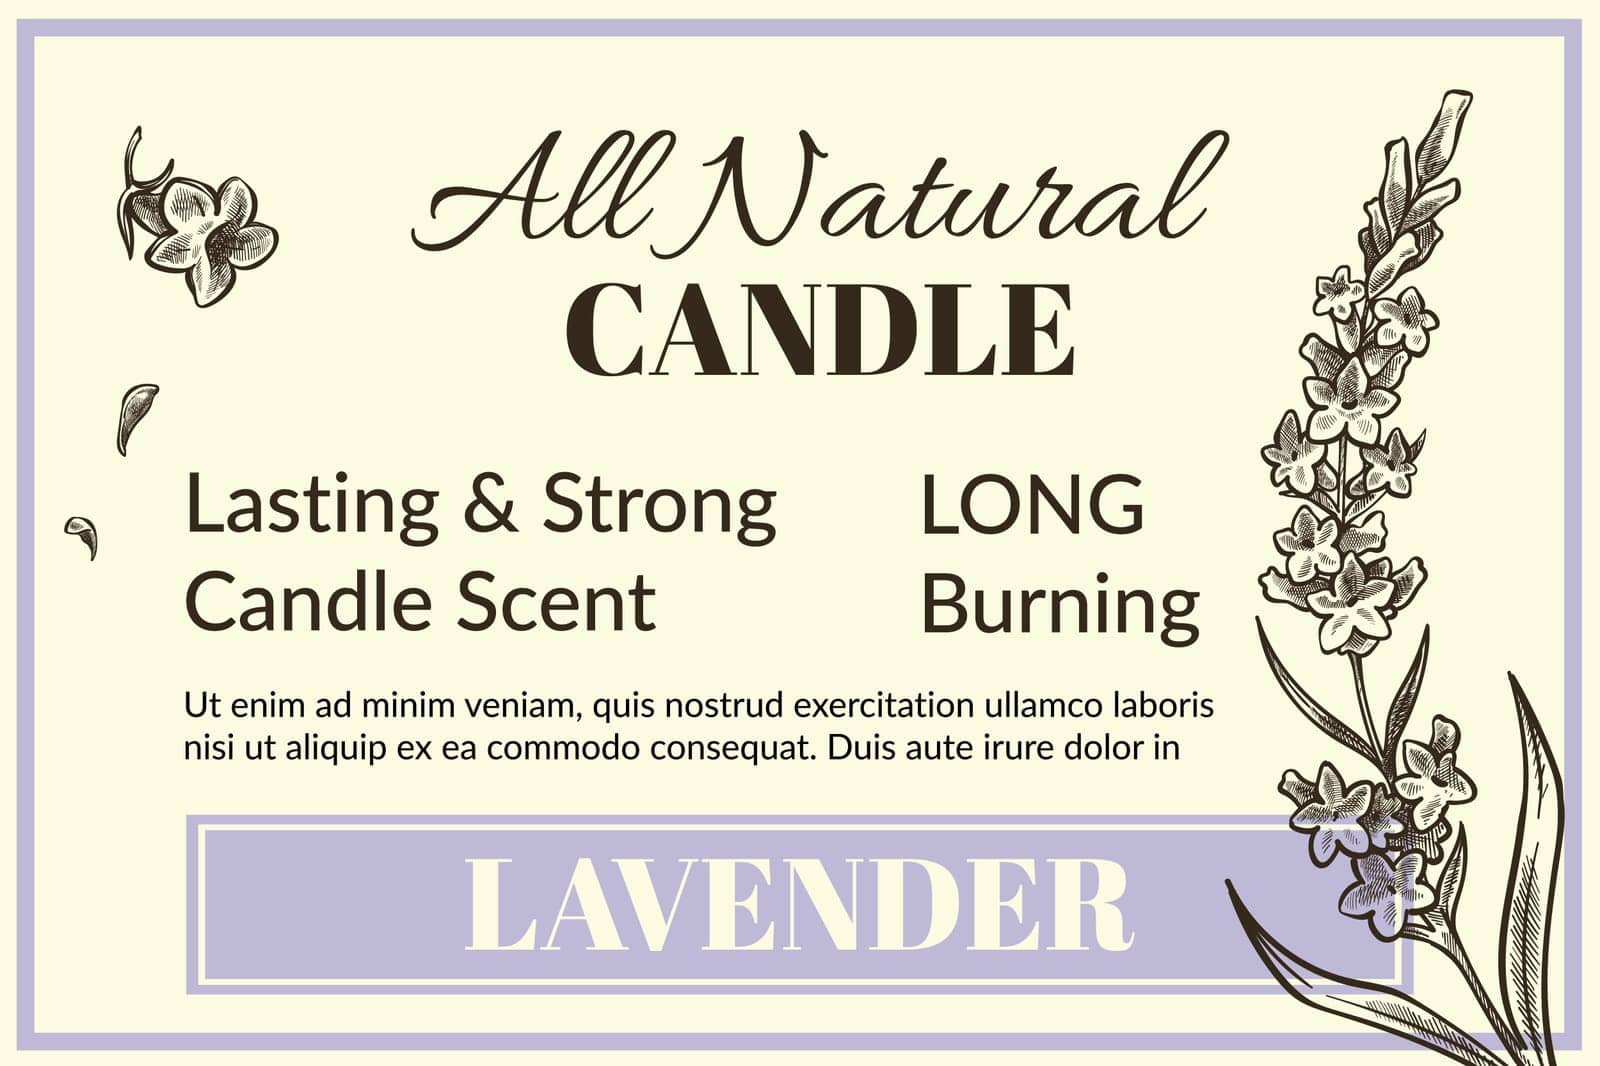 All natural candle, lasting and strong scents by Sonulkaster